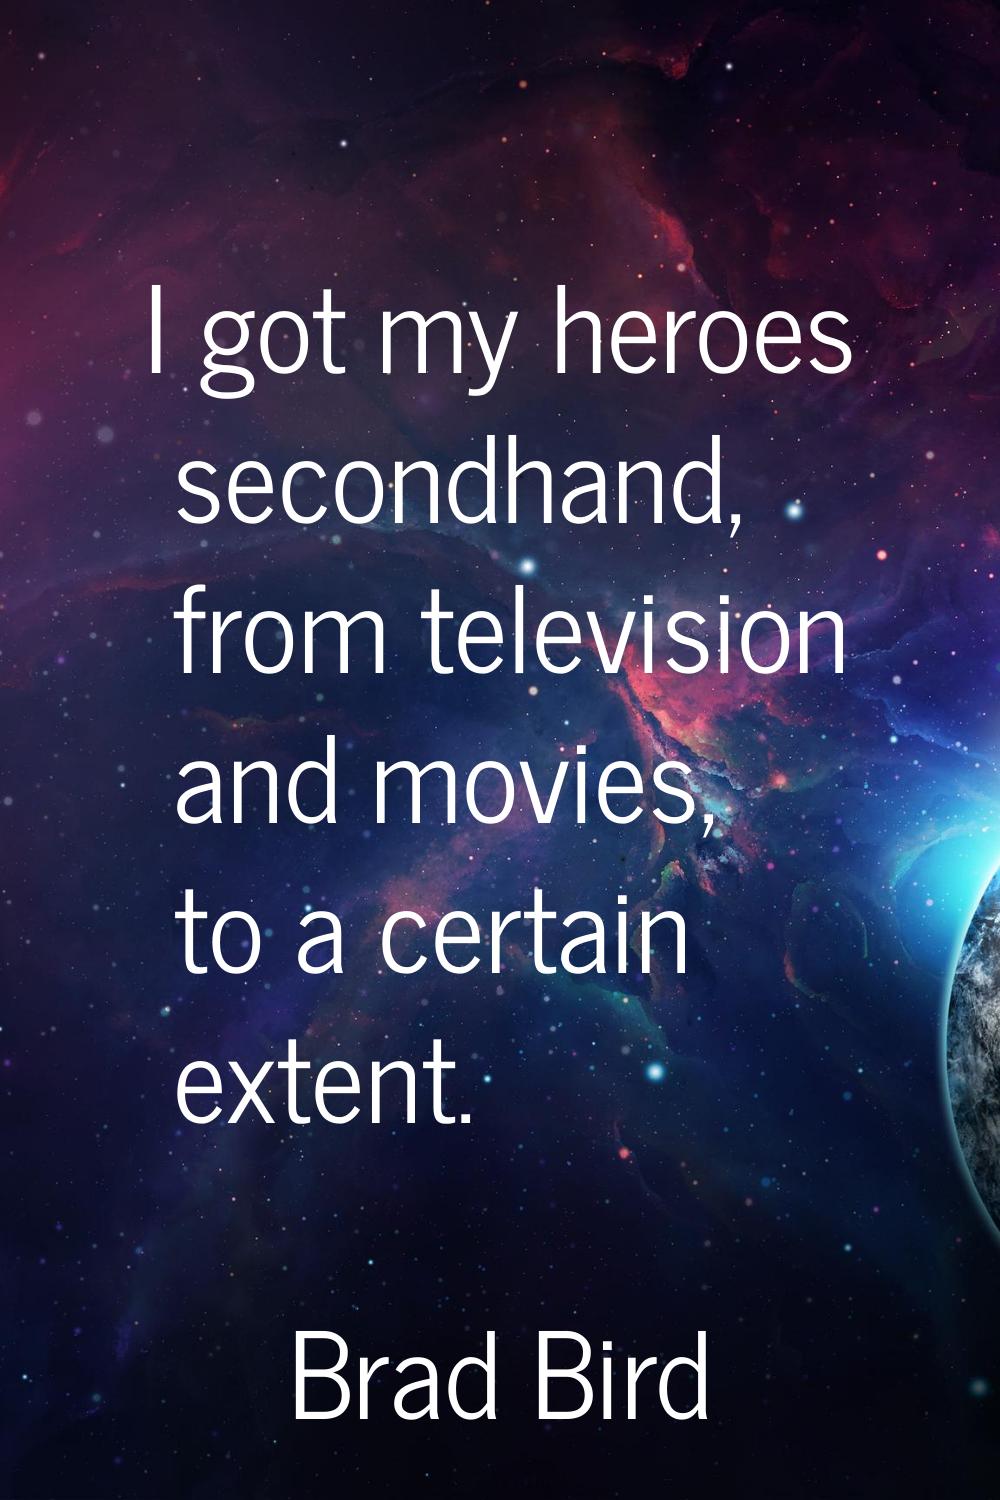 I got my heroes secondhand, from television and movies, to a certain extent.